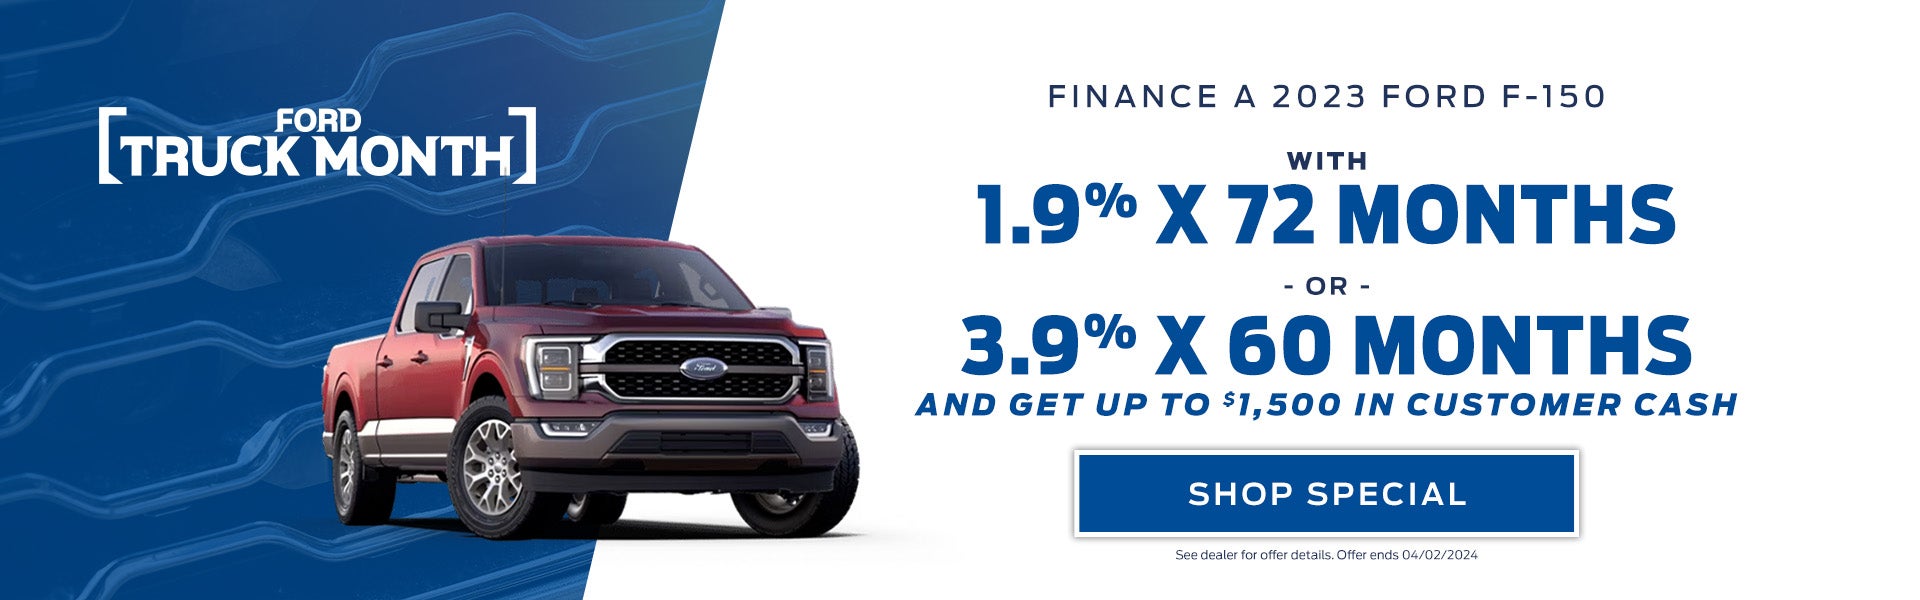 finance a 2023 ford f-150 with 1.9% APR for 72 months 